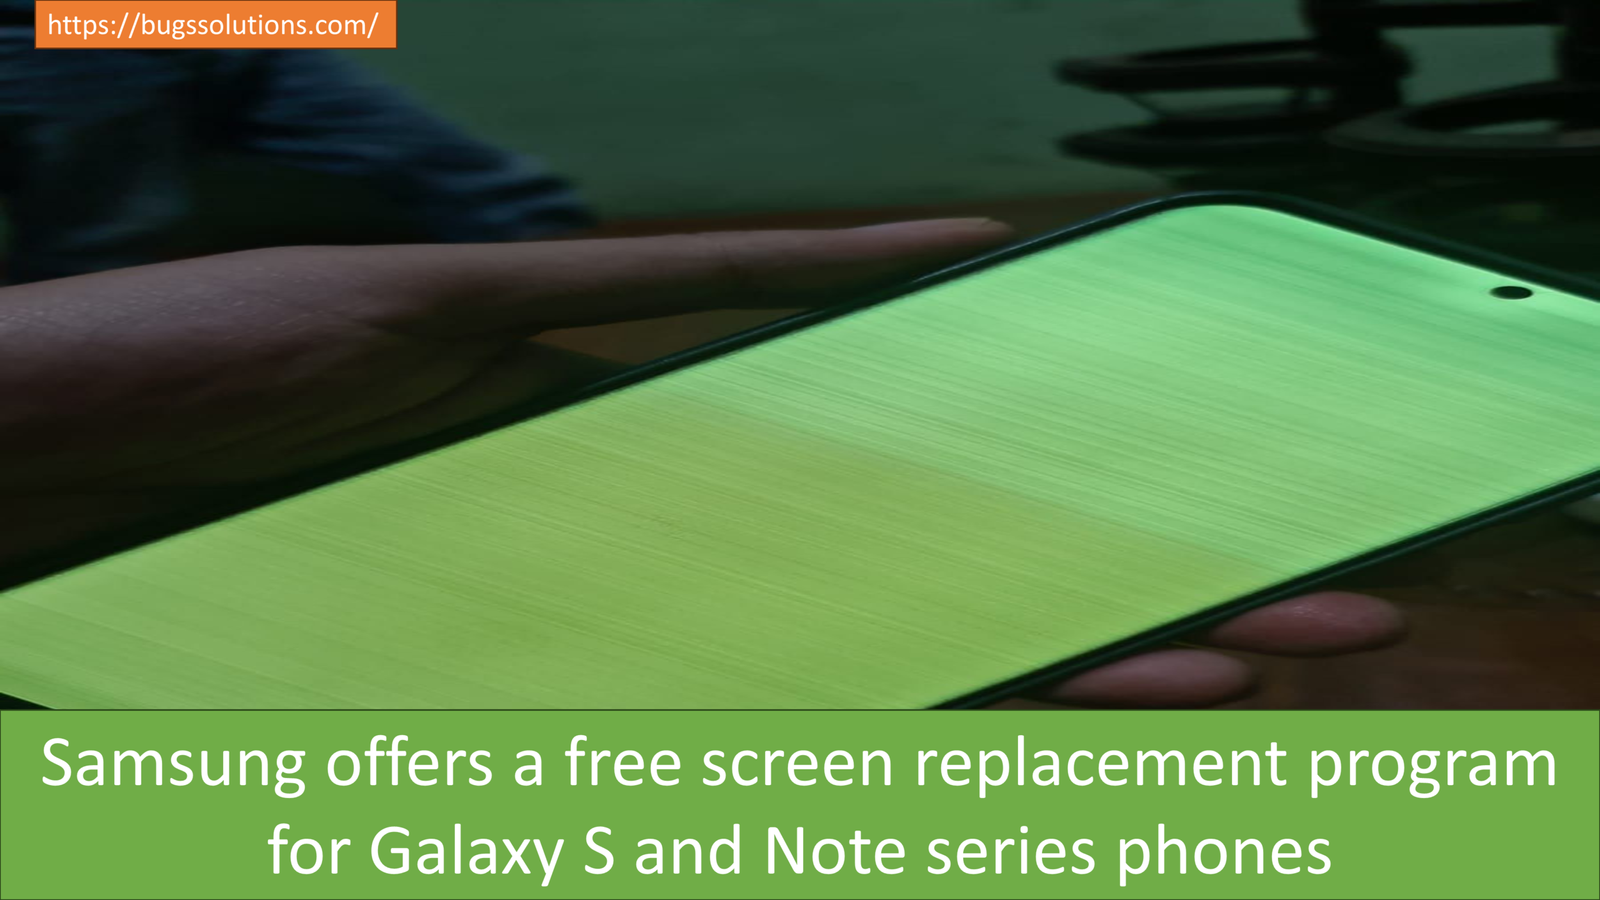 Samsung offers a free screen replacement program for Galaxy S and Note series phones who have problems with their green screens.